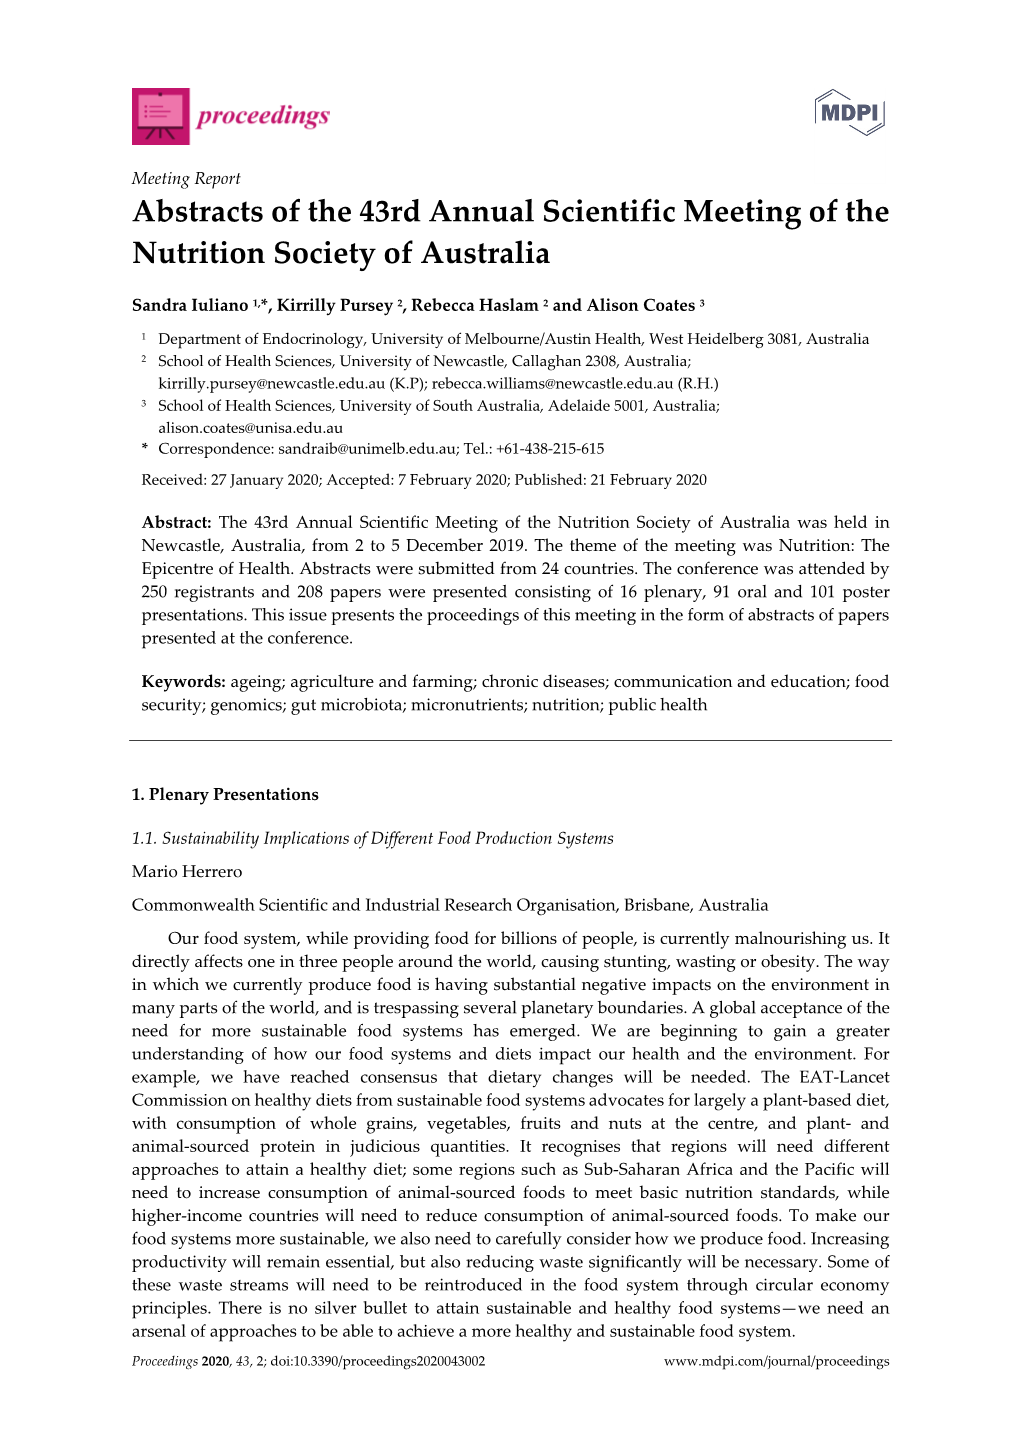 Abstracts of the 43Rd Annual Scientific Meeting of the Nutrition Society of Australia